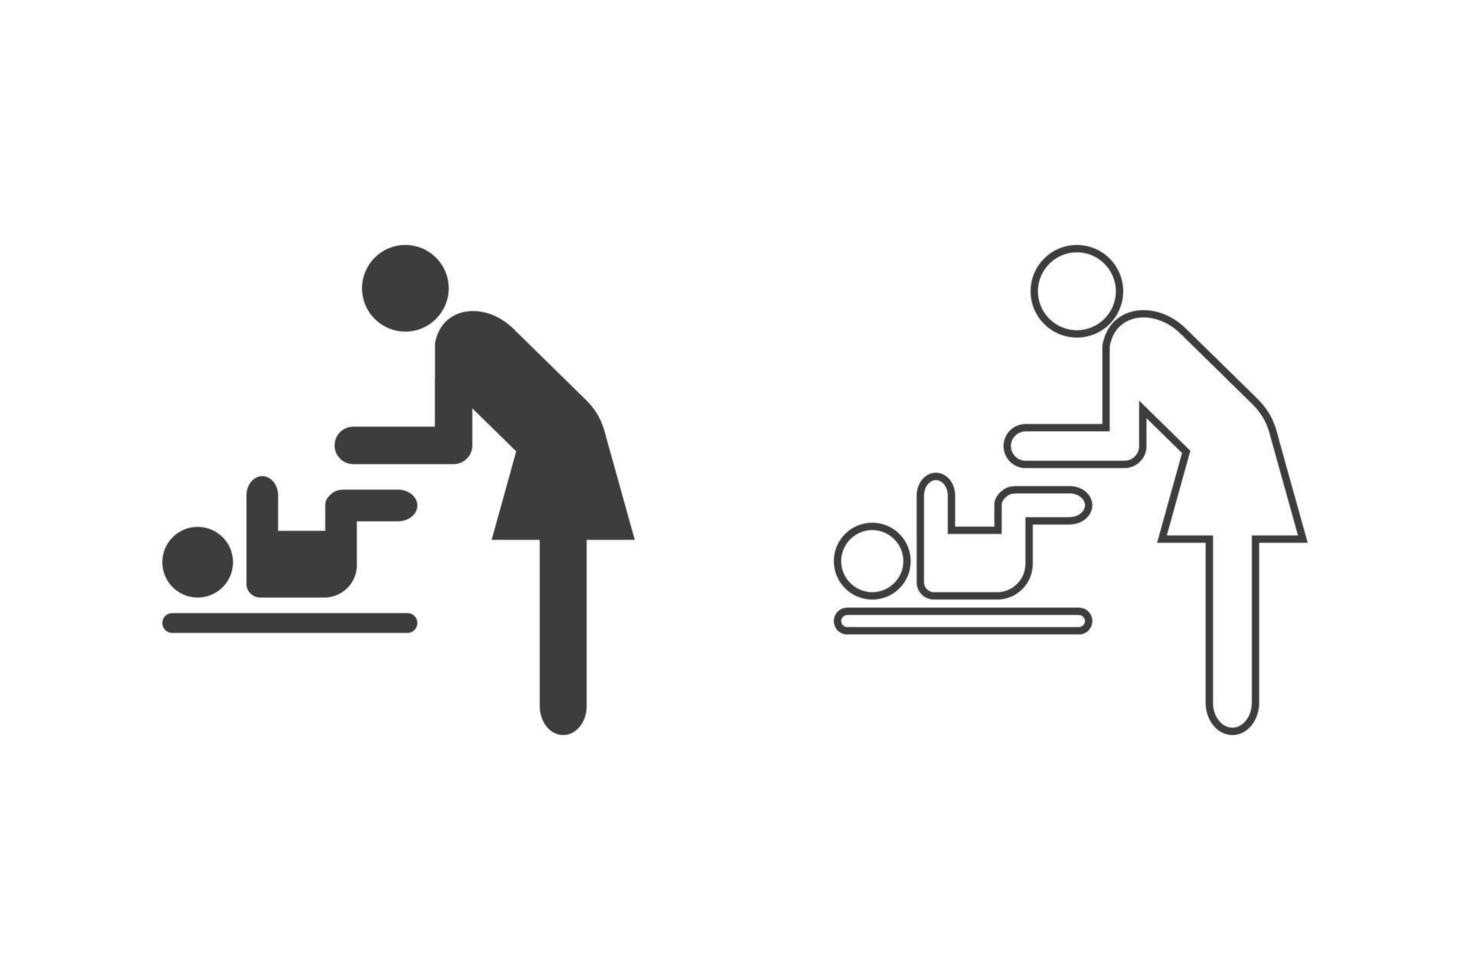 Women and baby, changing diapers vector illustration glyph style design with 2 style icons black and white. Isolated on white background.